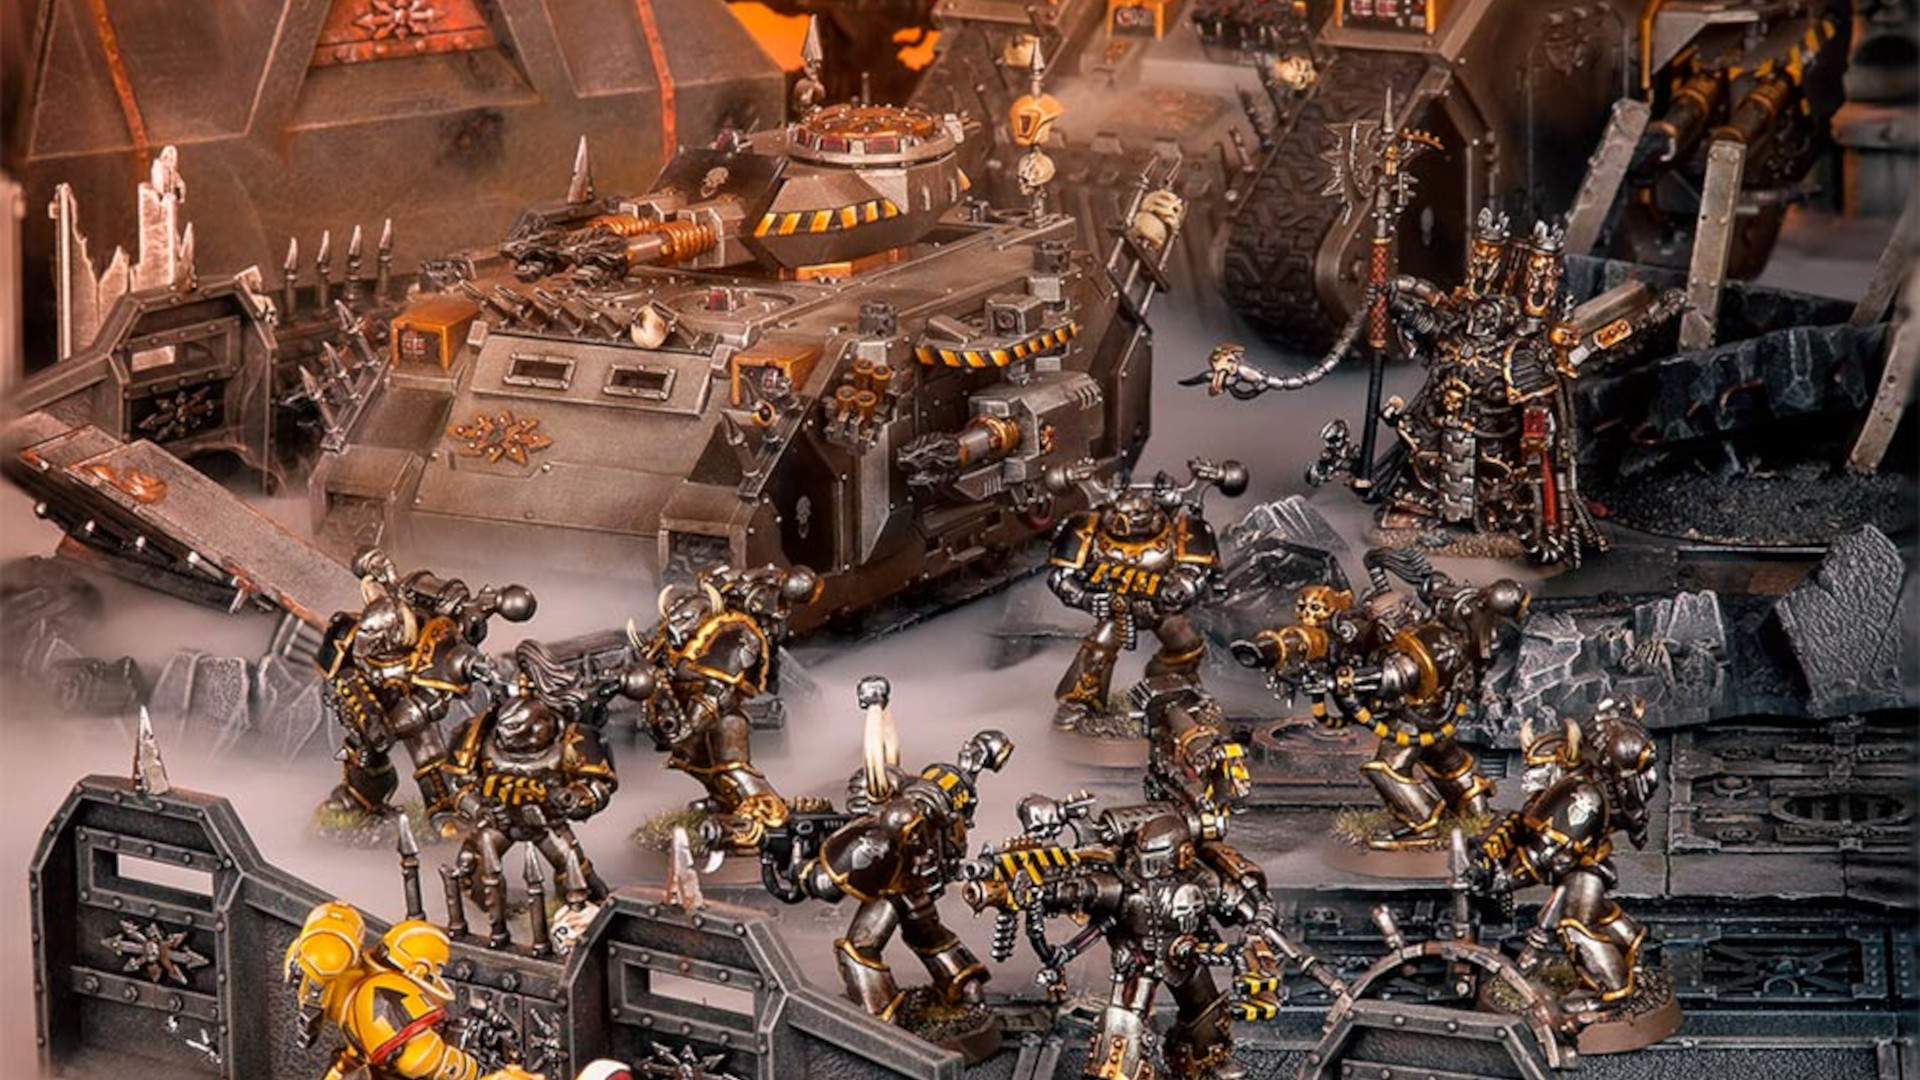 Iron Warriors Chaos Space Marines army advances - diorama photograph by Games Workshop, silver armoured Space Marines advance alongside tank support into enemy territory